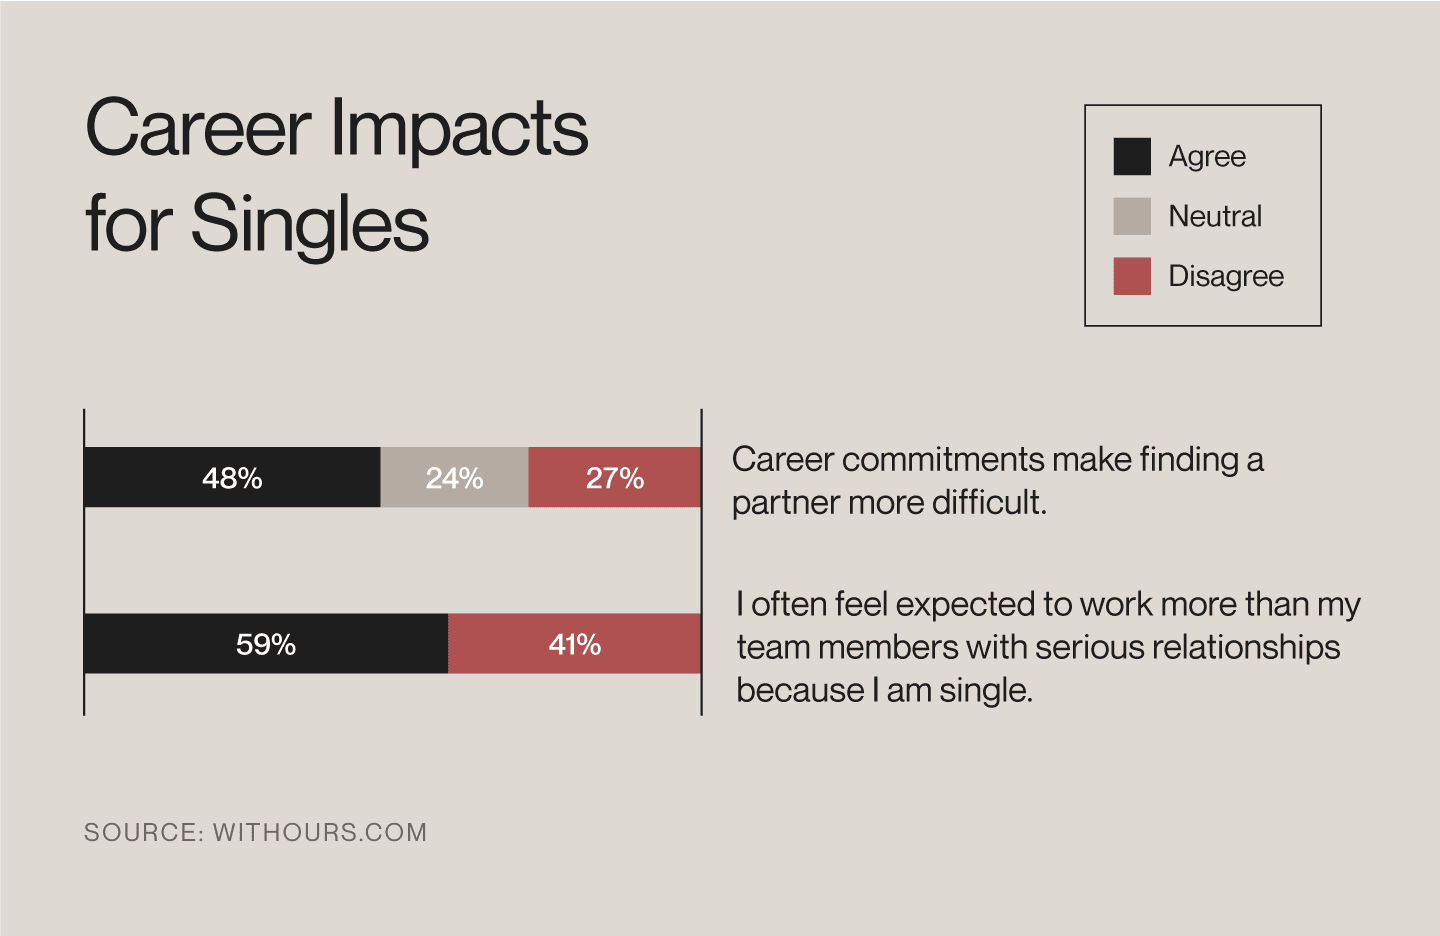 Single people report finding a partner is more difficult due to their job.